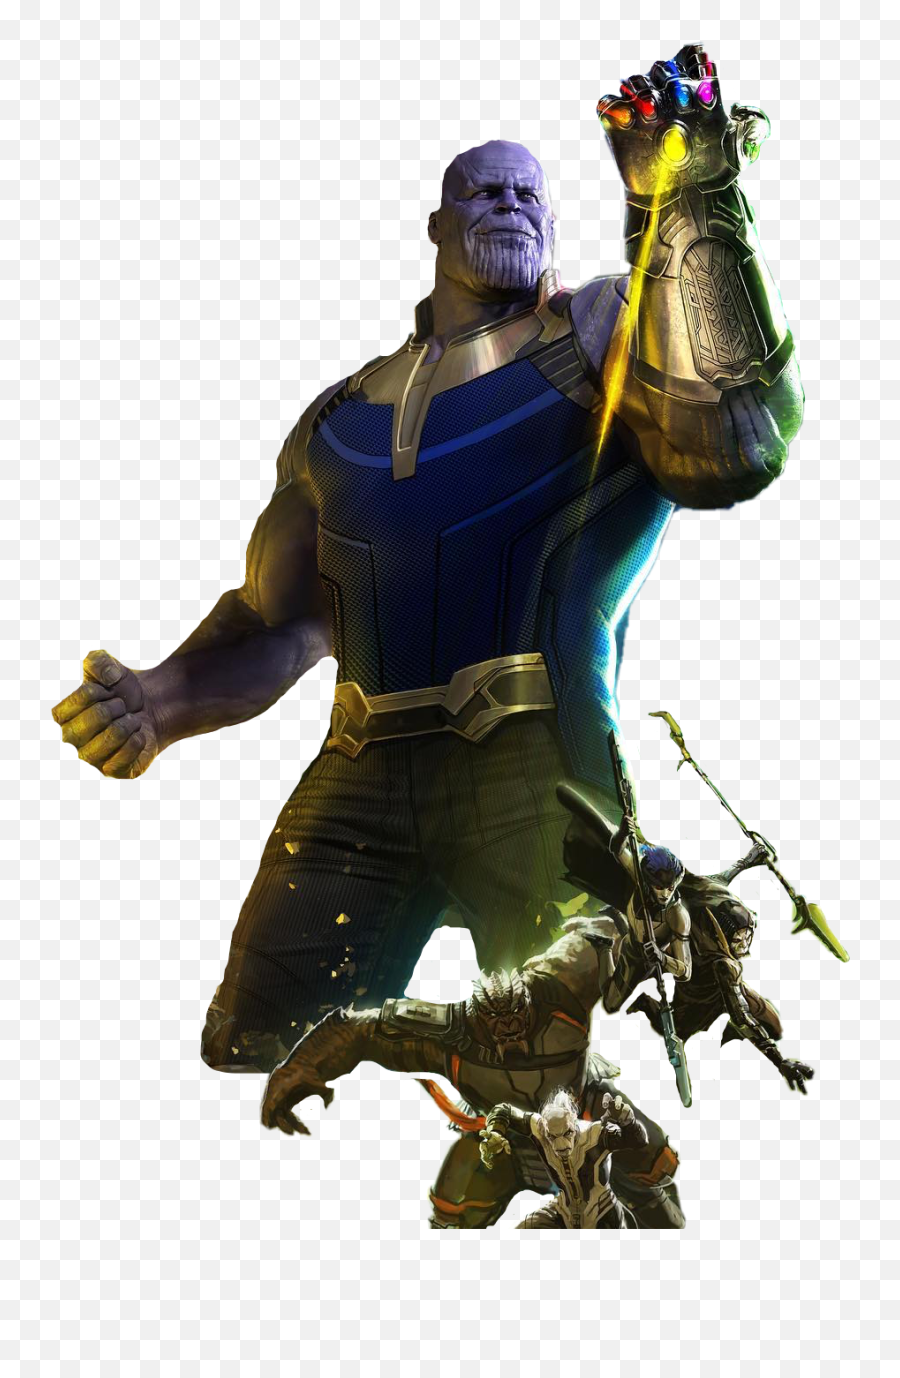 Download Thanos Png Transparent - Avengers Infinity War Thanos Thanos Png Emoji,Thanos Transparent Background